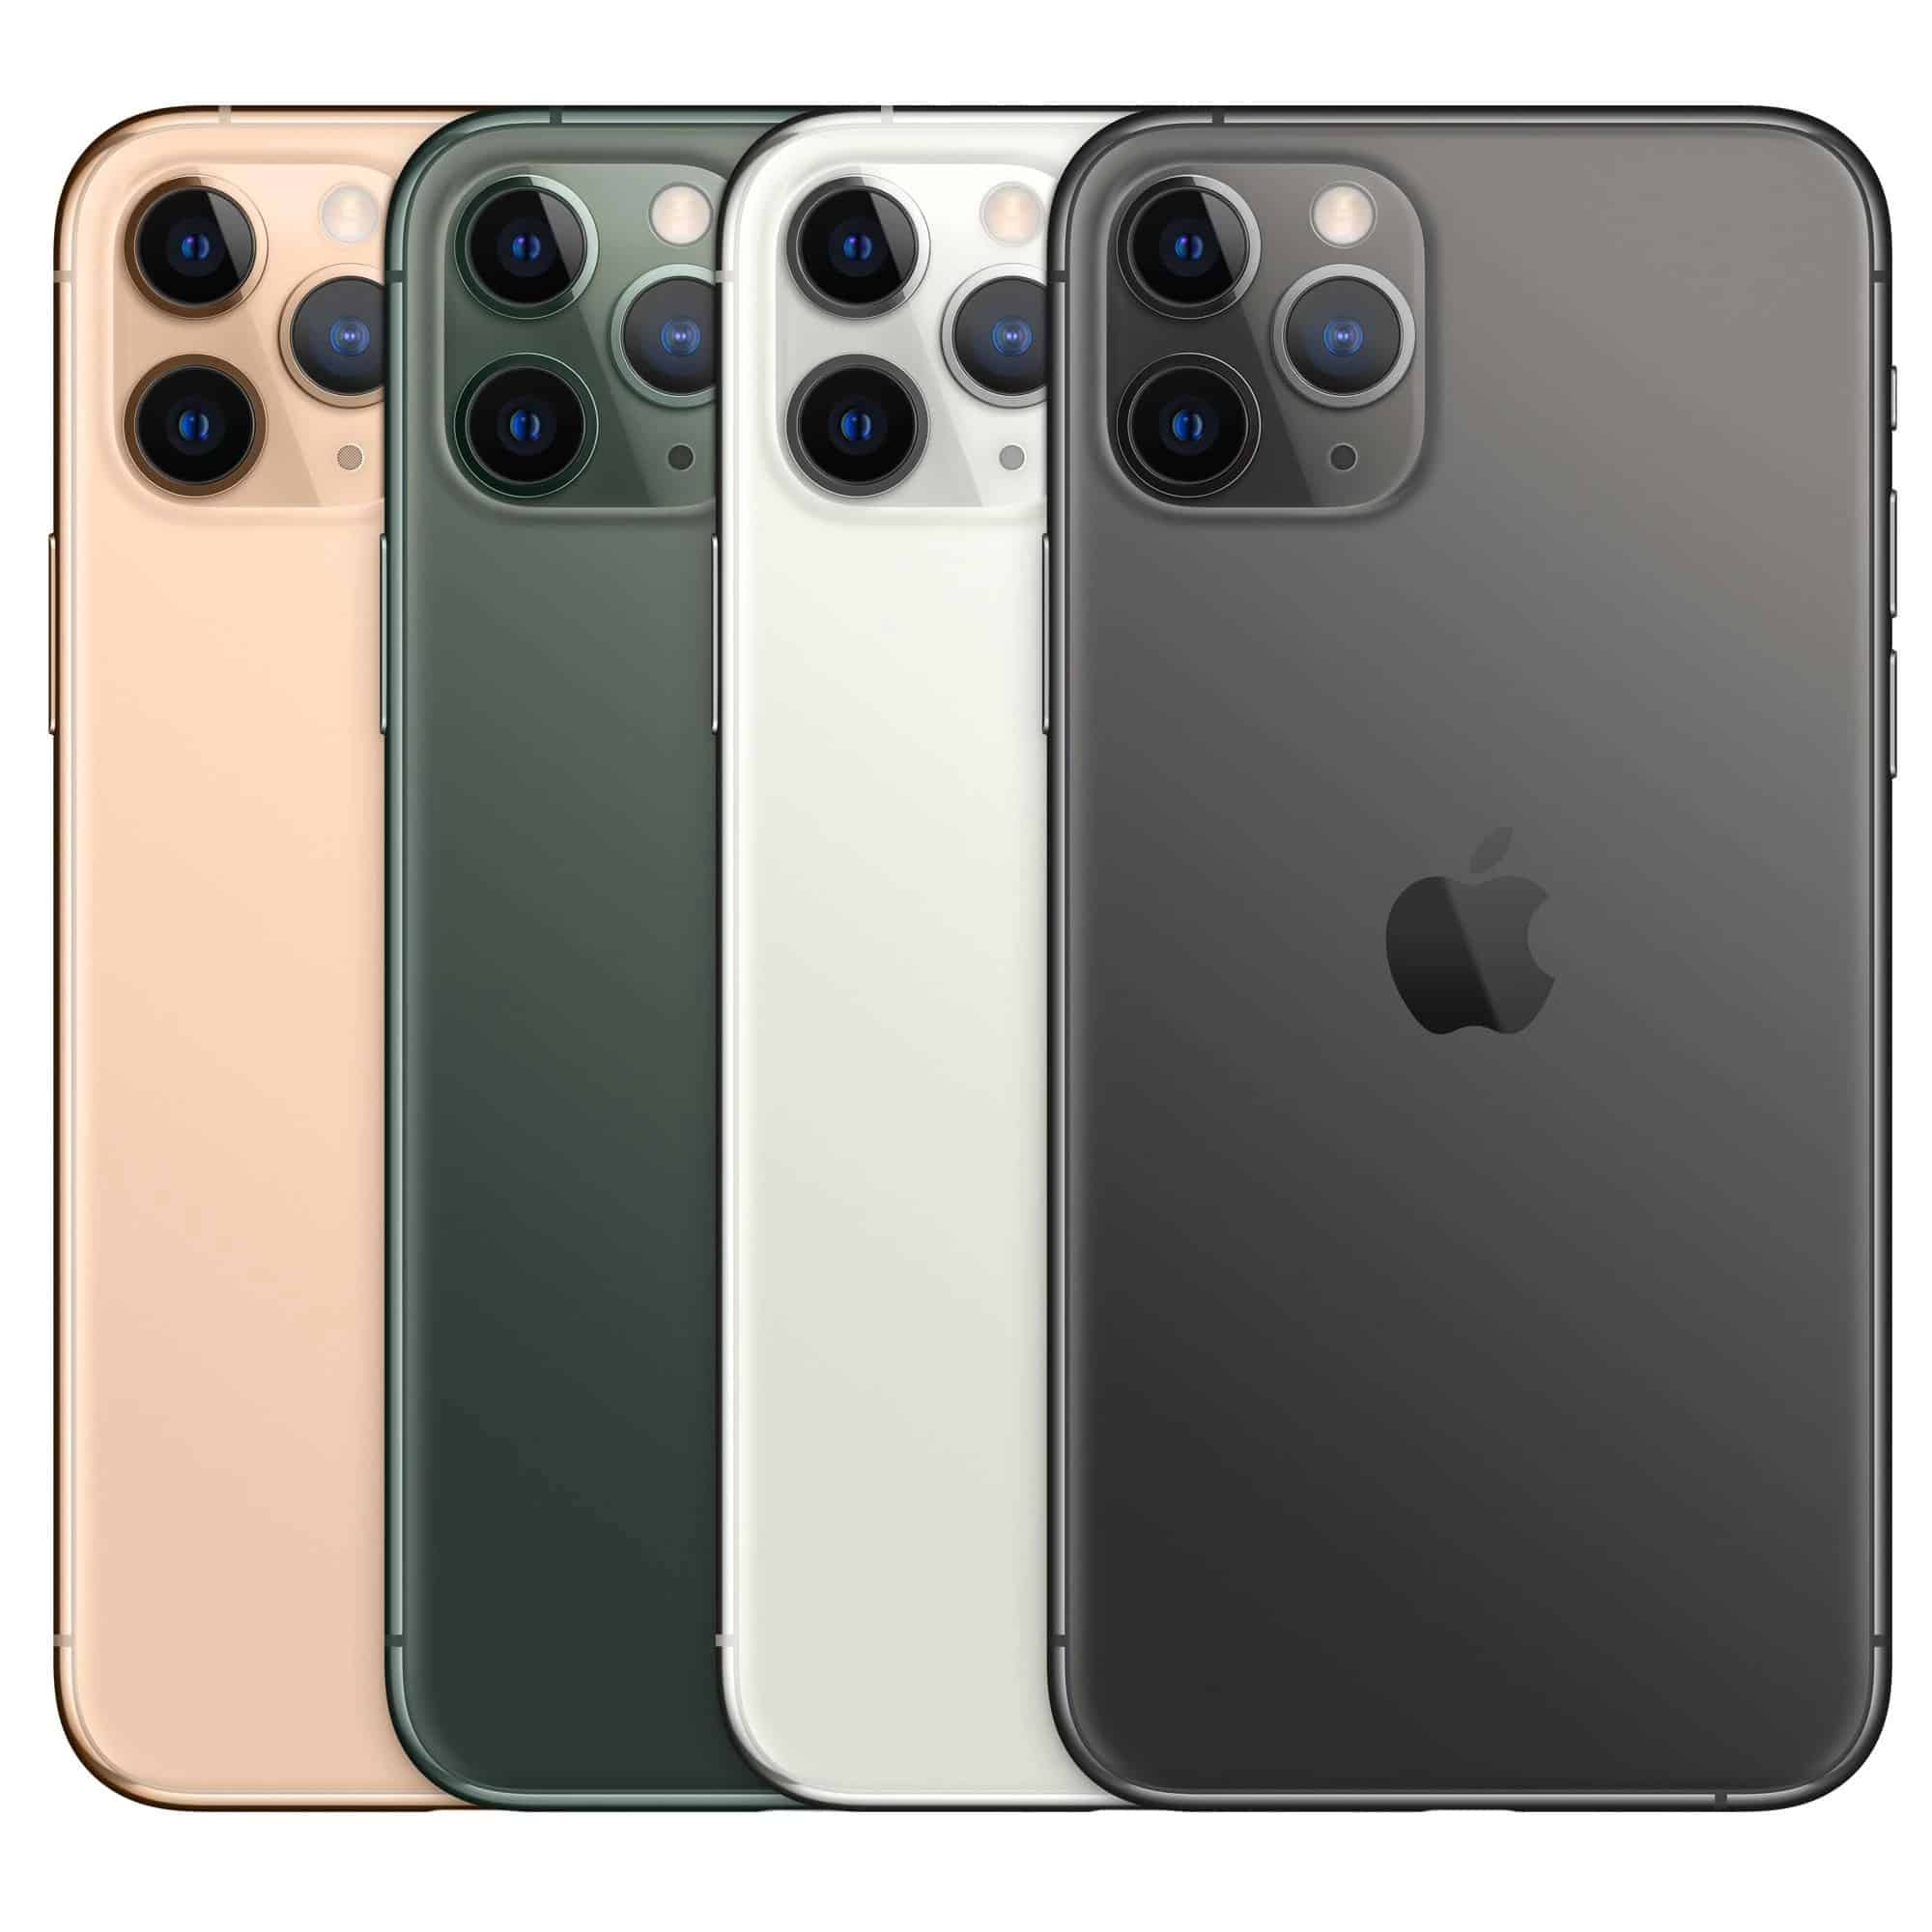 Not All iPhone 12 Versions Will Come with Top 5G Specs